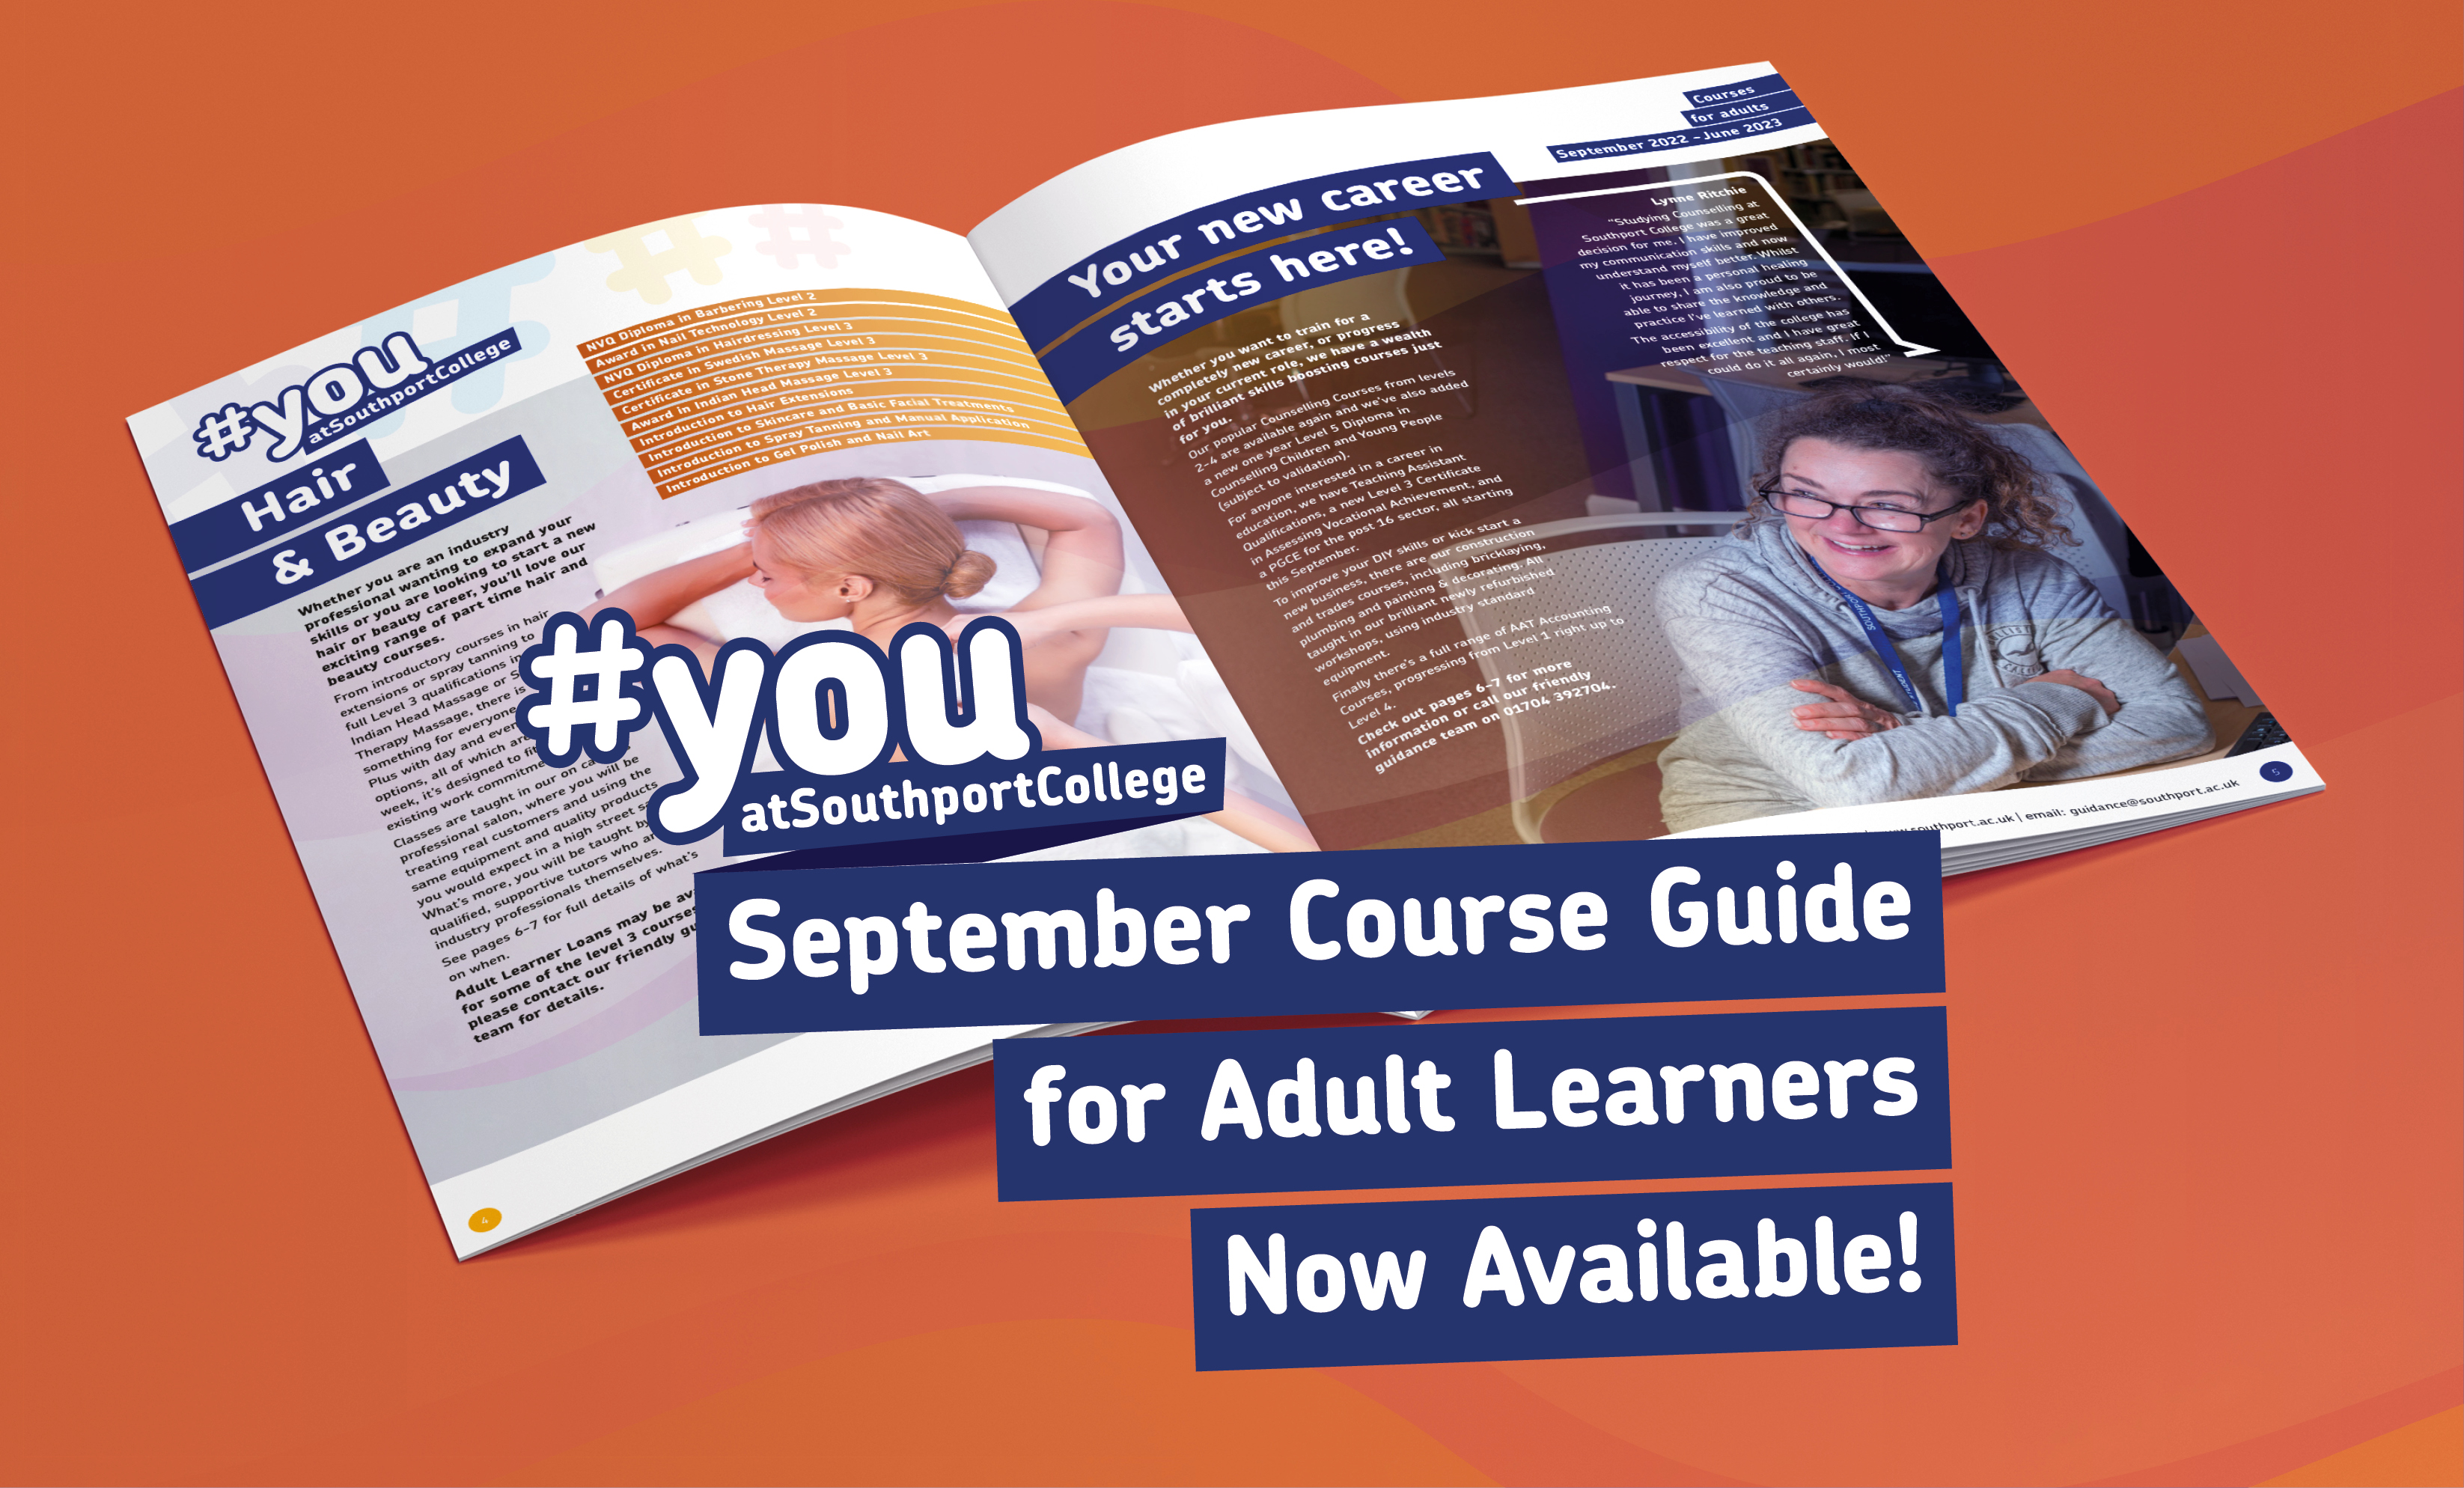 Courses for adults